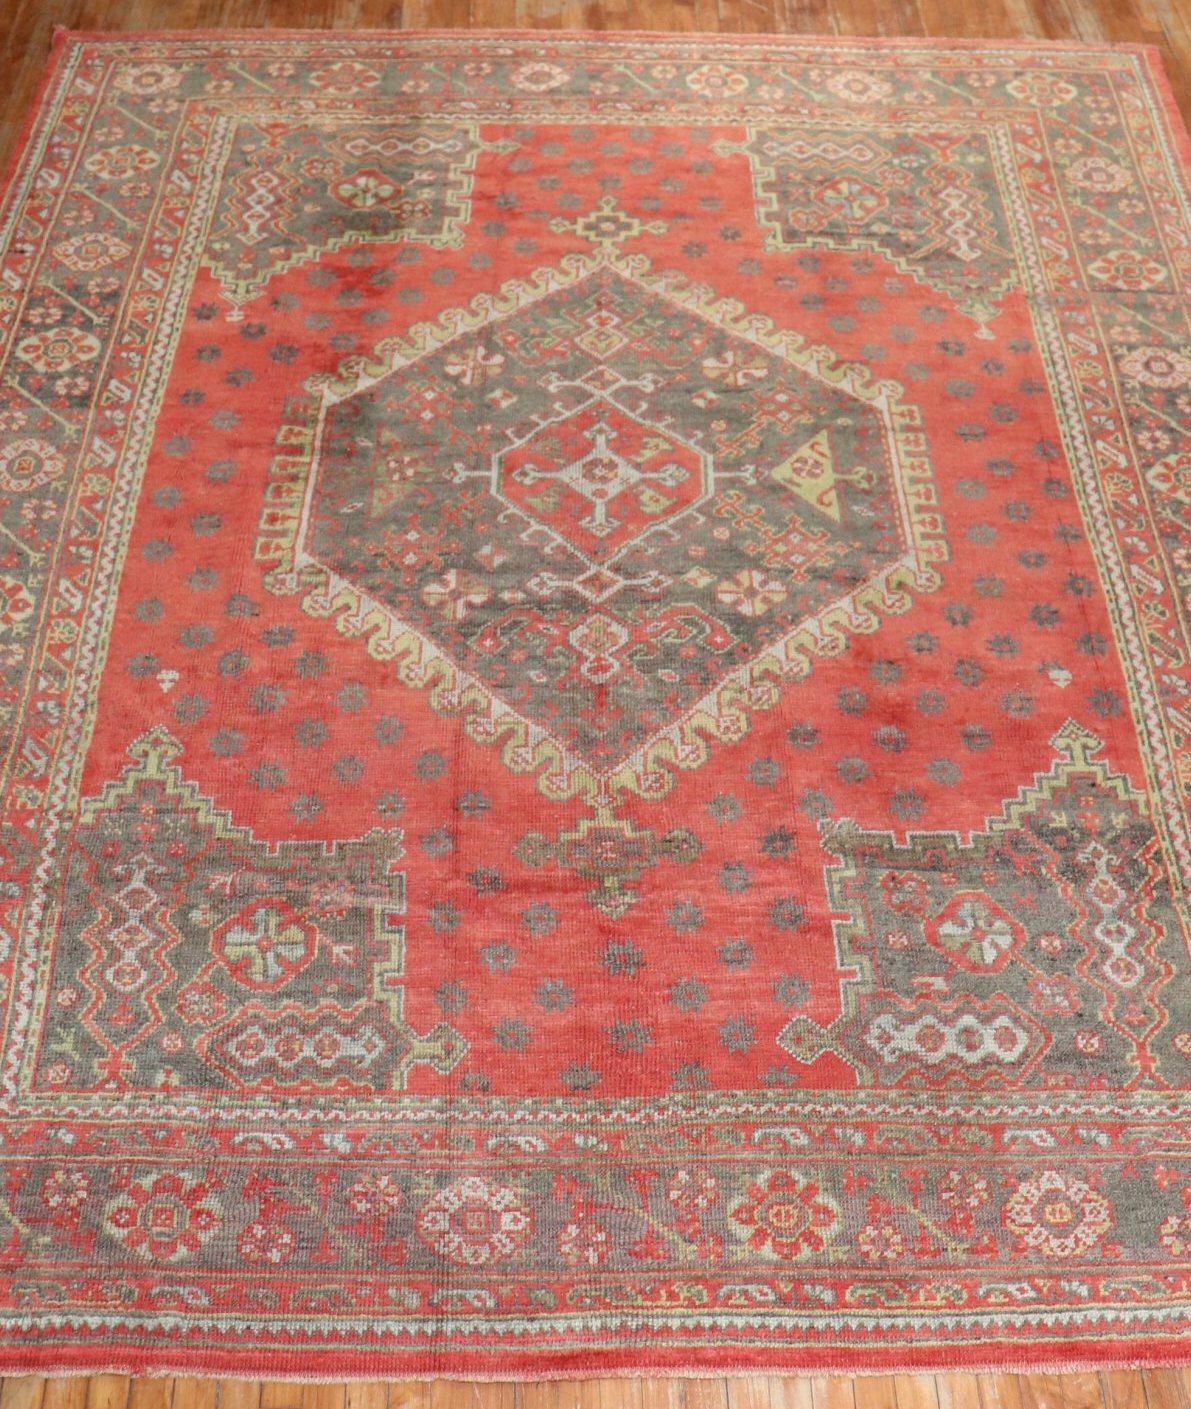 An early 20th century Turkish Oushak with a traditional medallion and border motif on a red field. The border and medallion are gray

Measures: 9'2